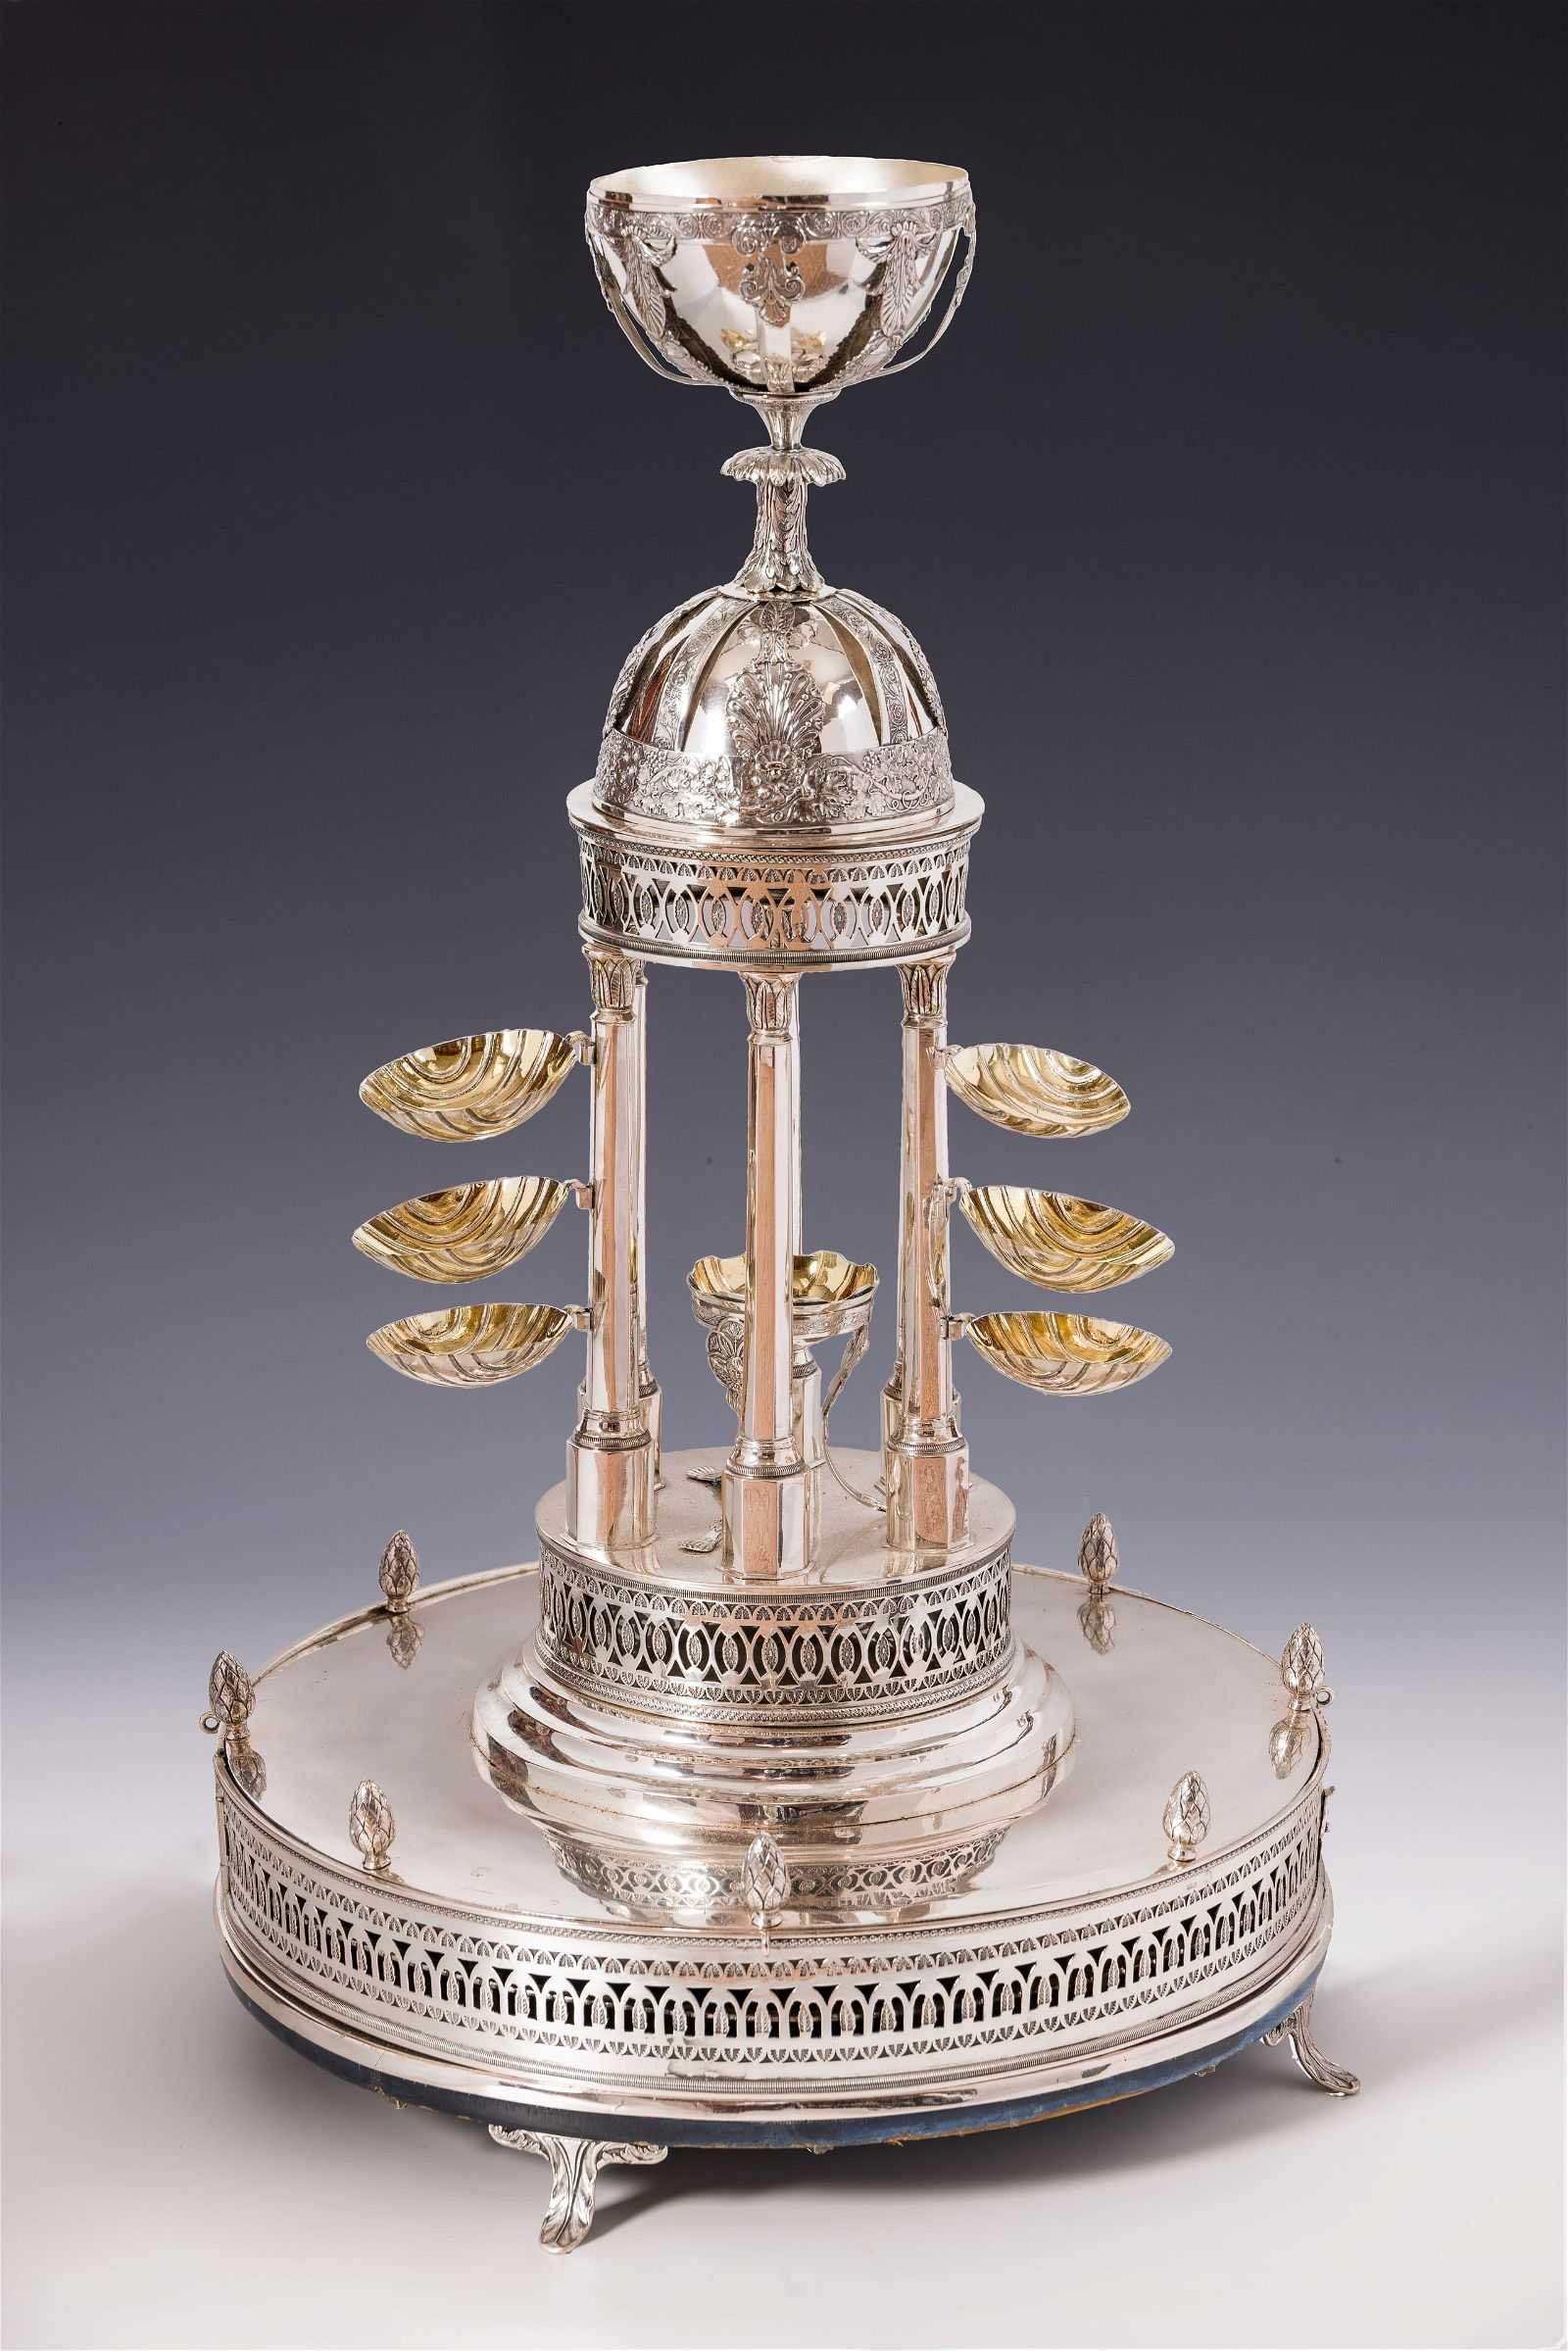 Neoclassical silver Passover compendium by George Heinrich Steffen, made in Berlin in 1817, estimated at $25,000-$35,000 at J. Greenstein & Co.